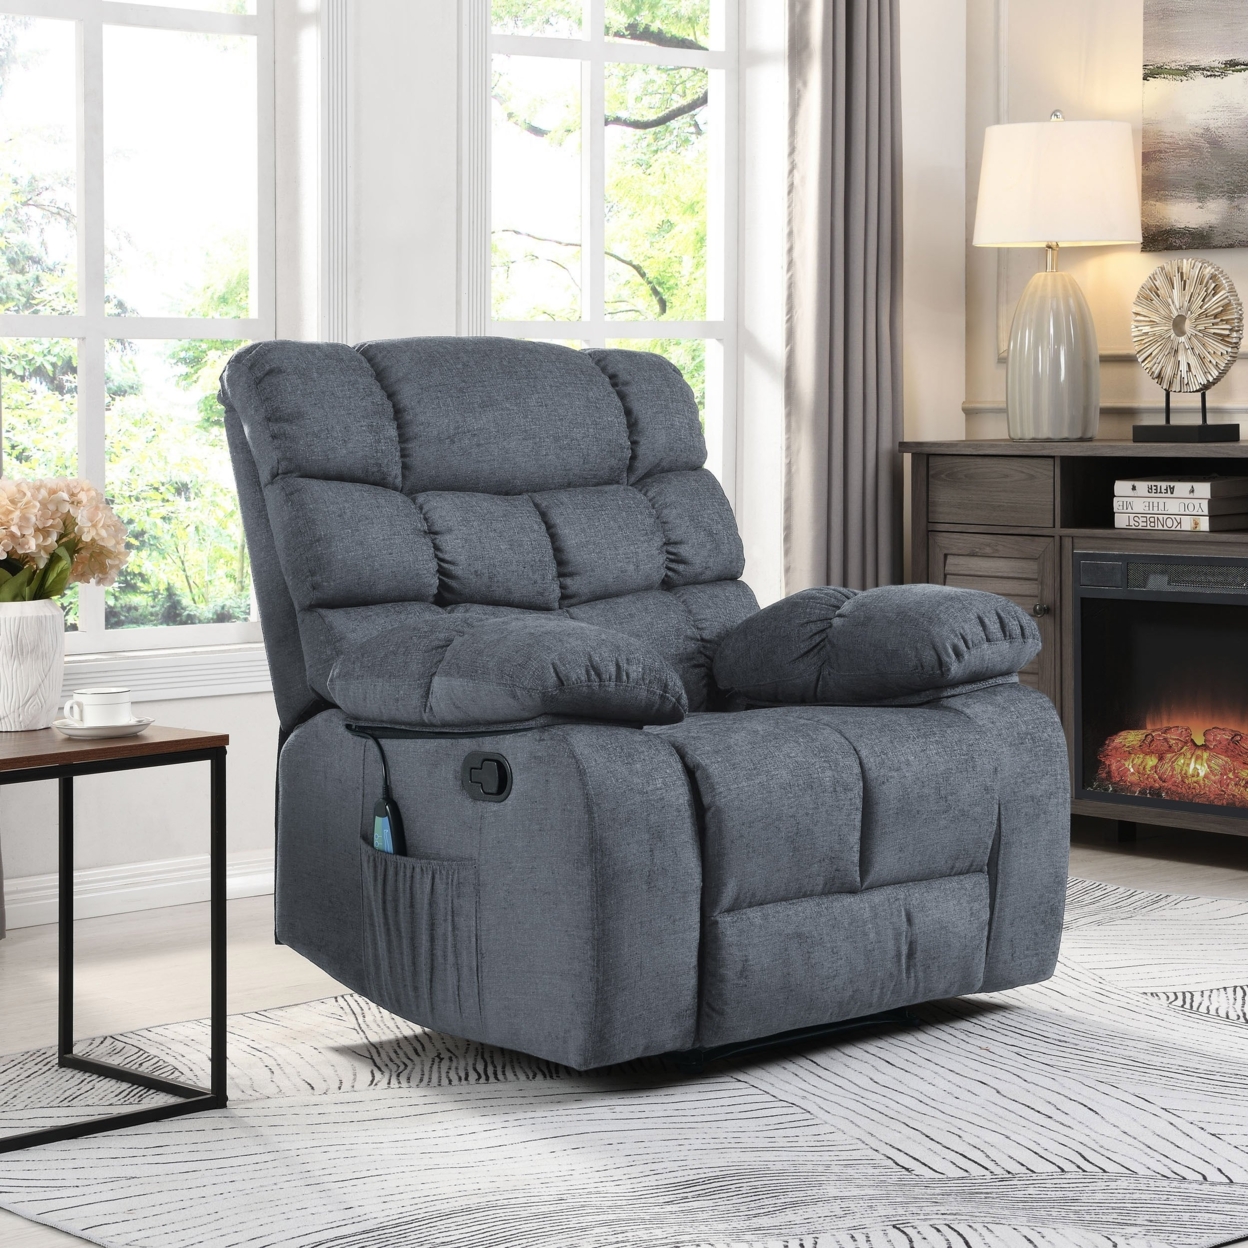 Conyers Contemporary Pillow Tufted Massage Recliner - Black/charcoal